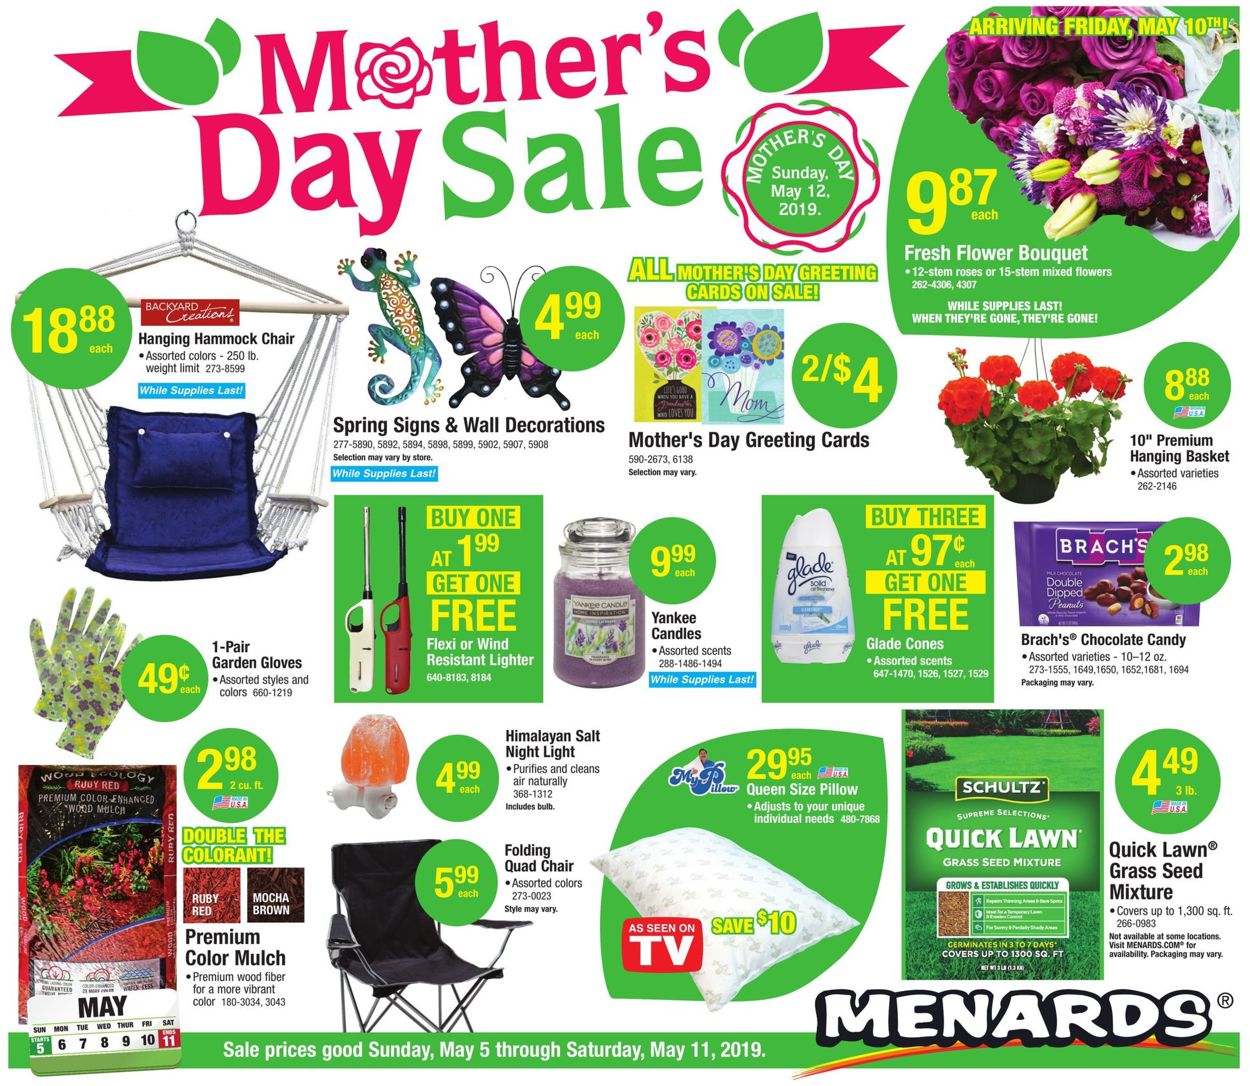 Menards Current weekly ad 05/05 - 05/11/2019 - mediakits.theygsgroup.com